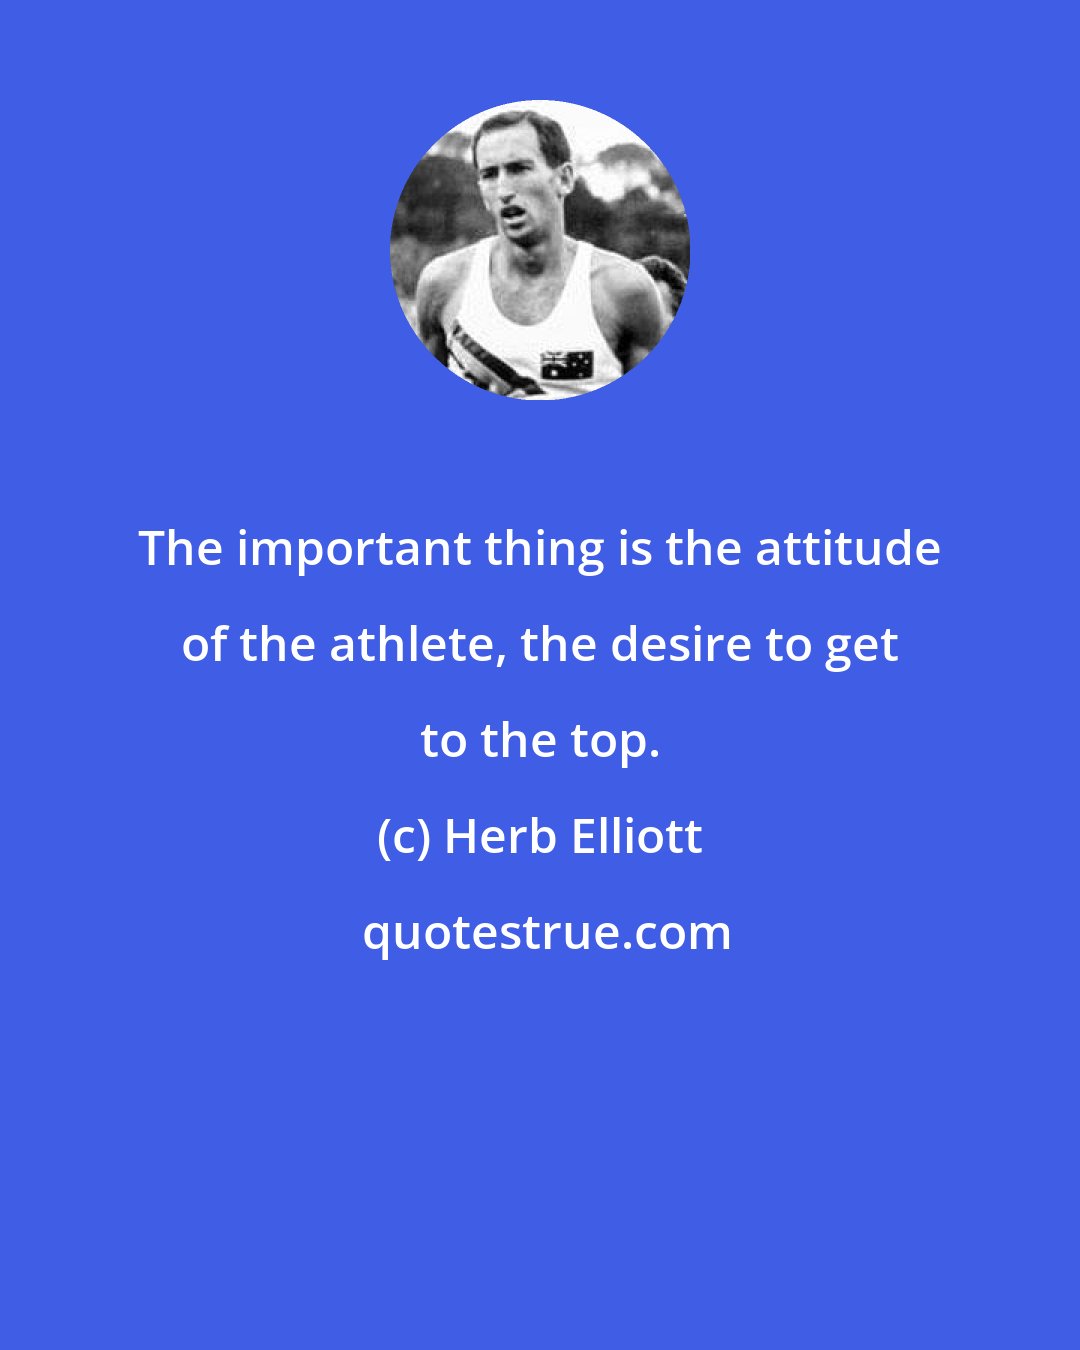 Herb Elliott: The important thing is the attitude of the athlete, the desire to get to the top.